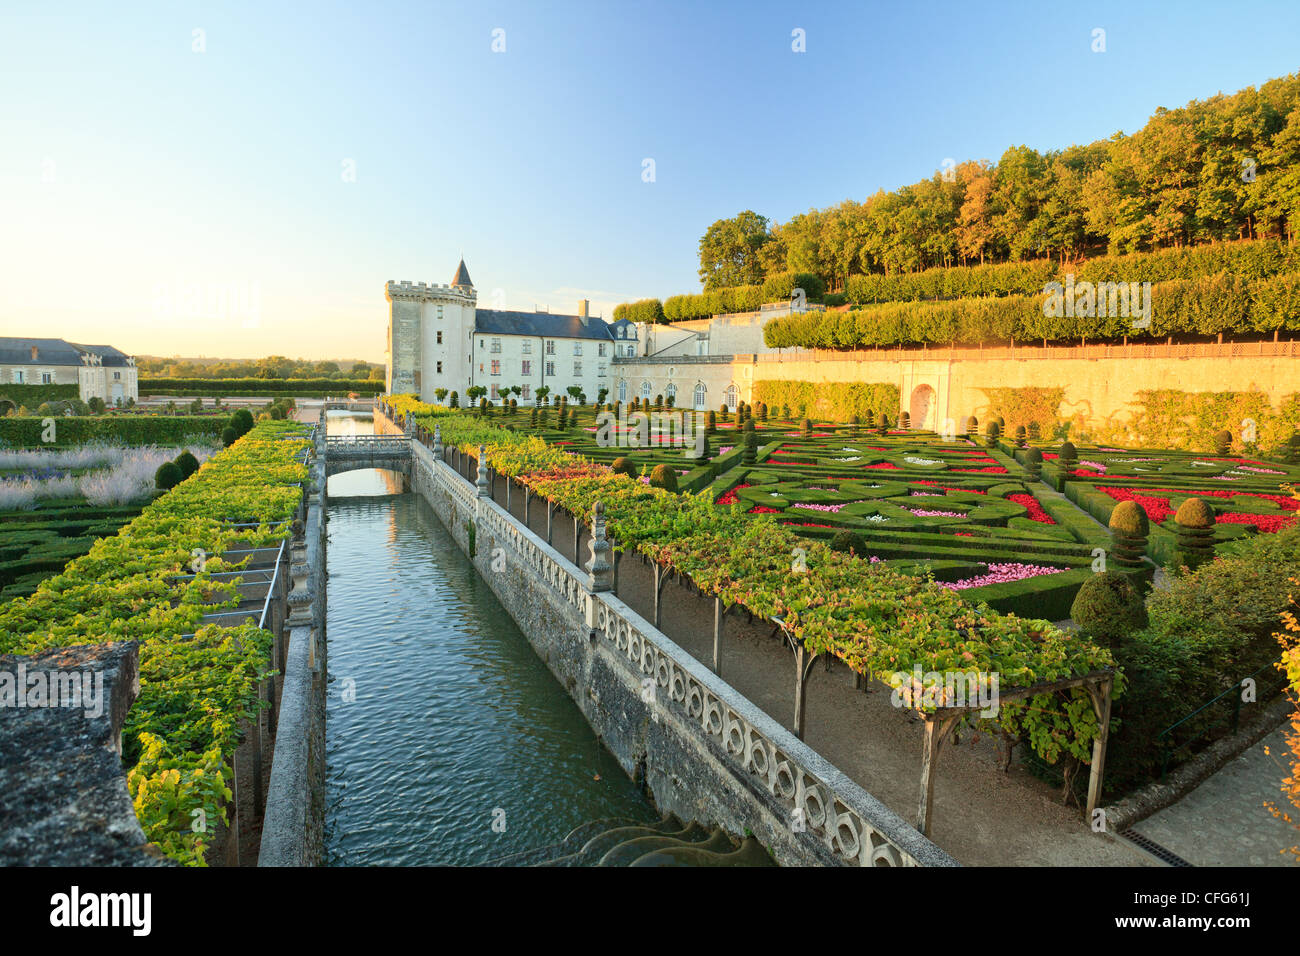 France, Gardens of the Chateau de Villandry, the channel. Stock Photo